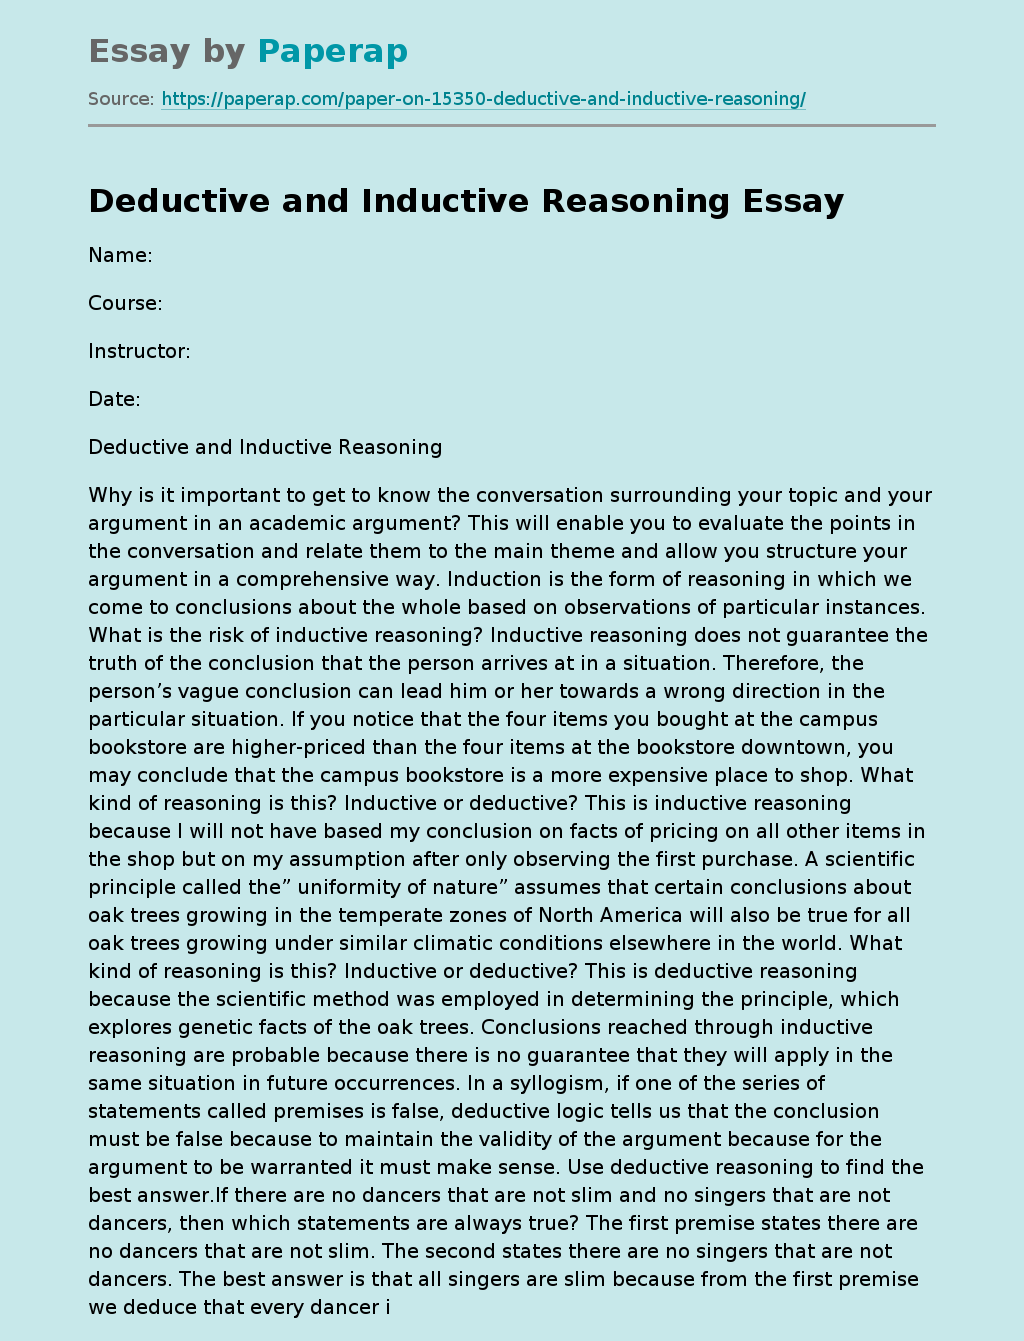 Deductive and Inductive Reasoning